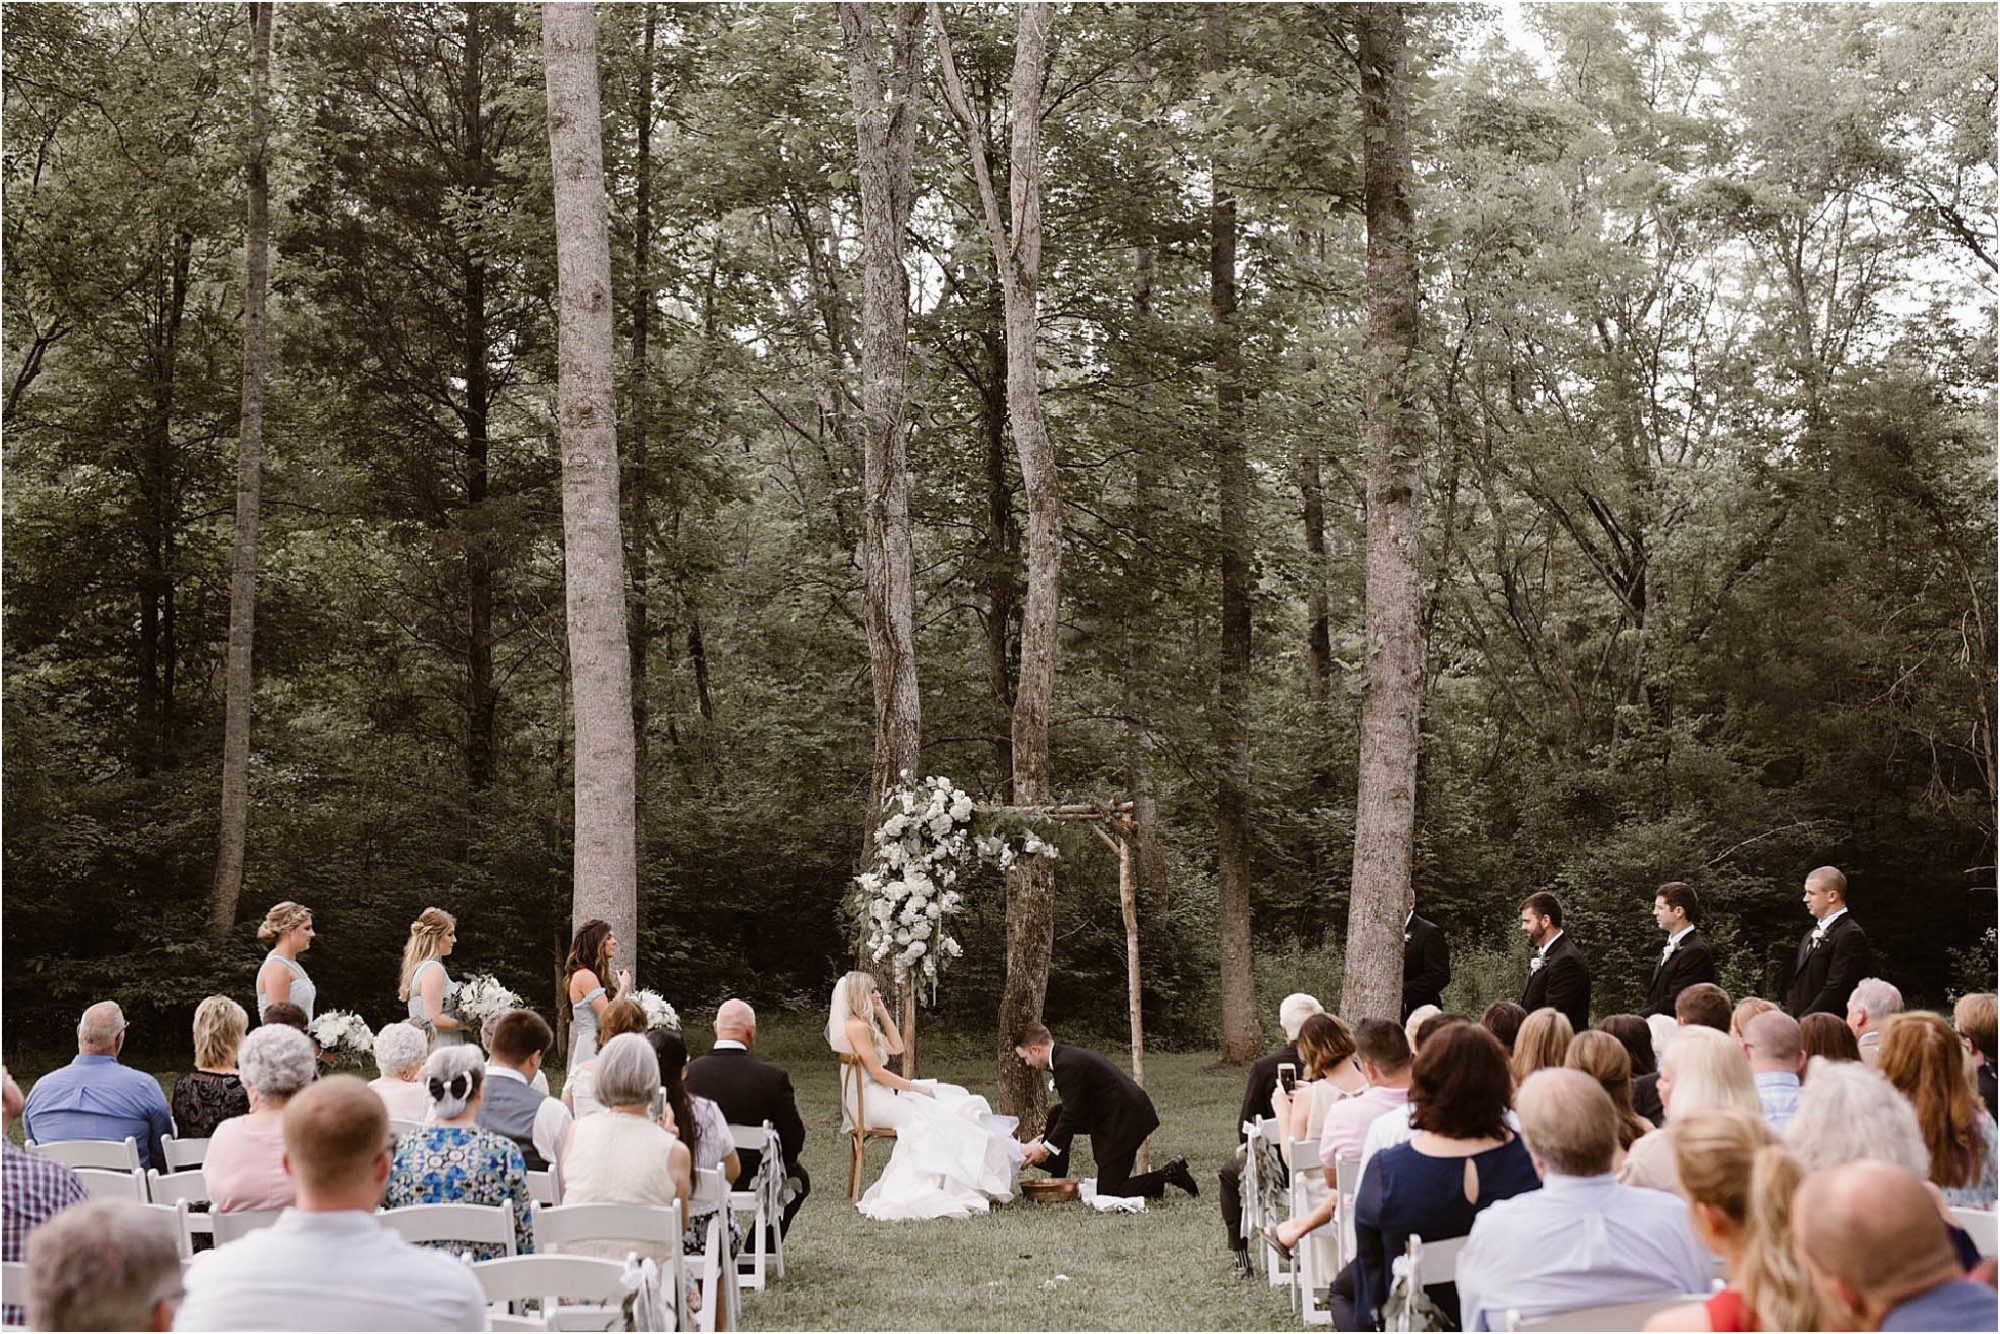 Feet-washing ceremony at vineyard wedding in Tennessee